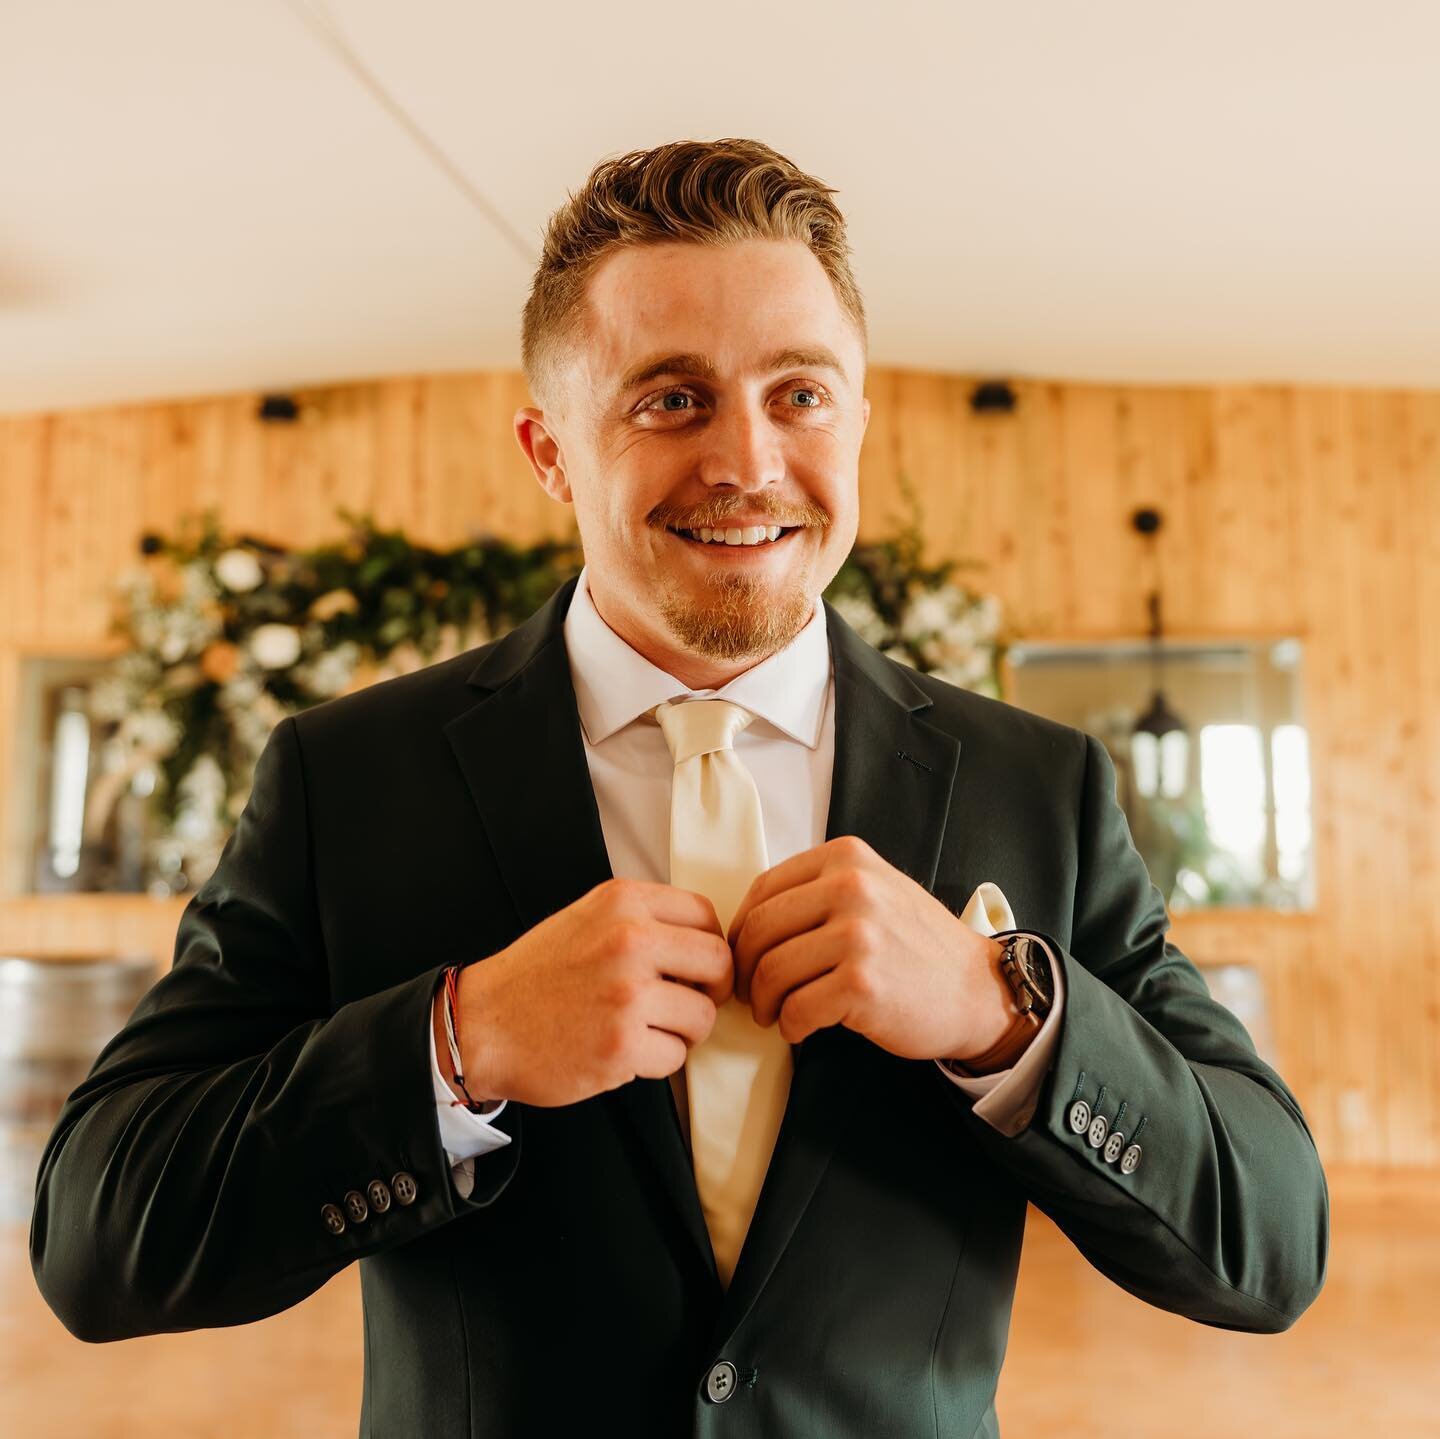 A moment for the groom✨
-
And to show off our groom&rsquo;s room. This man cave gives you and your groomsmen your own space to enjoy a brew or two, watch the game, play football, jam to tunes, and just relax before the ceremony✨
-
Photography: @cotto